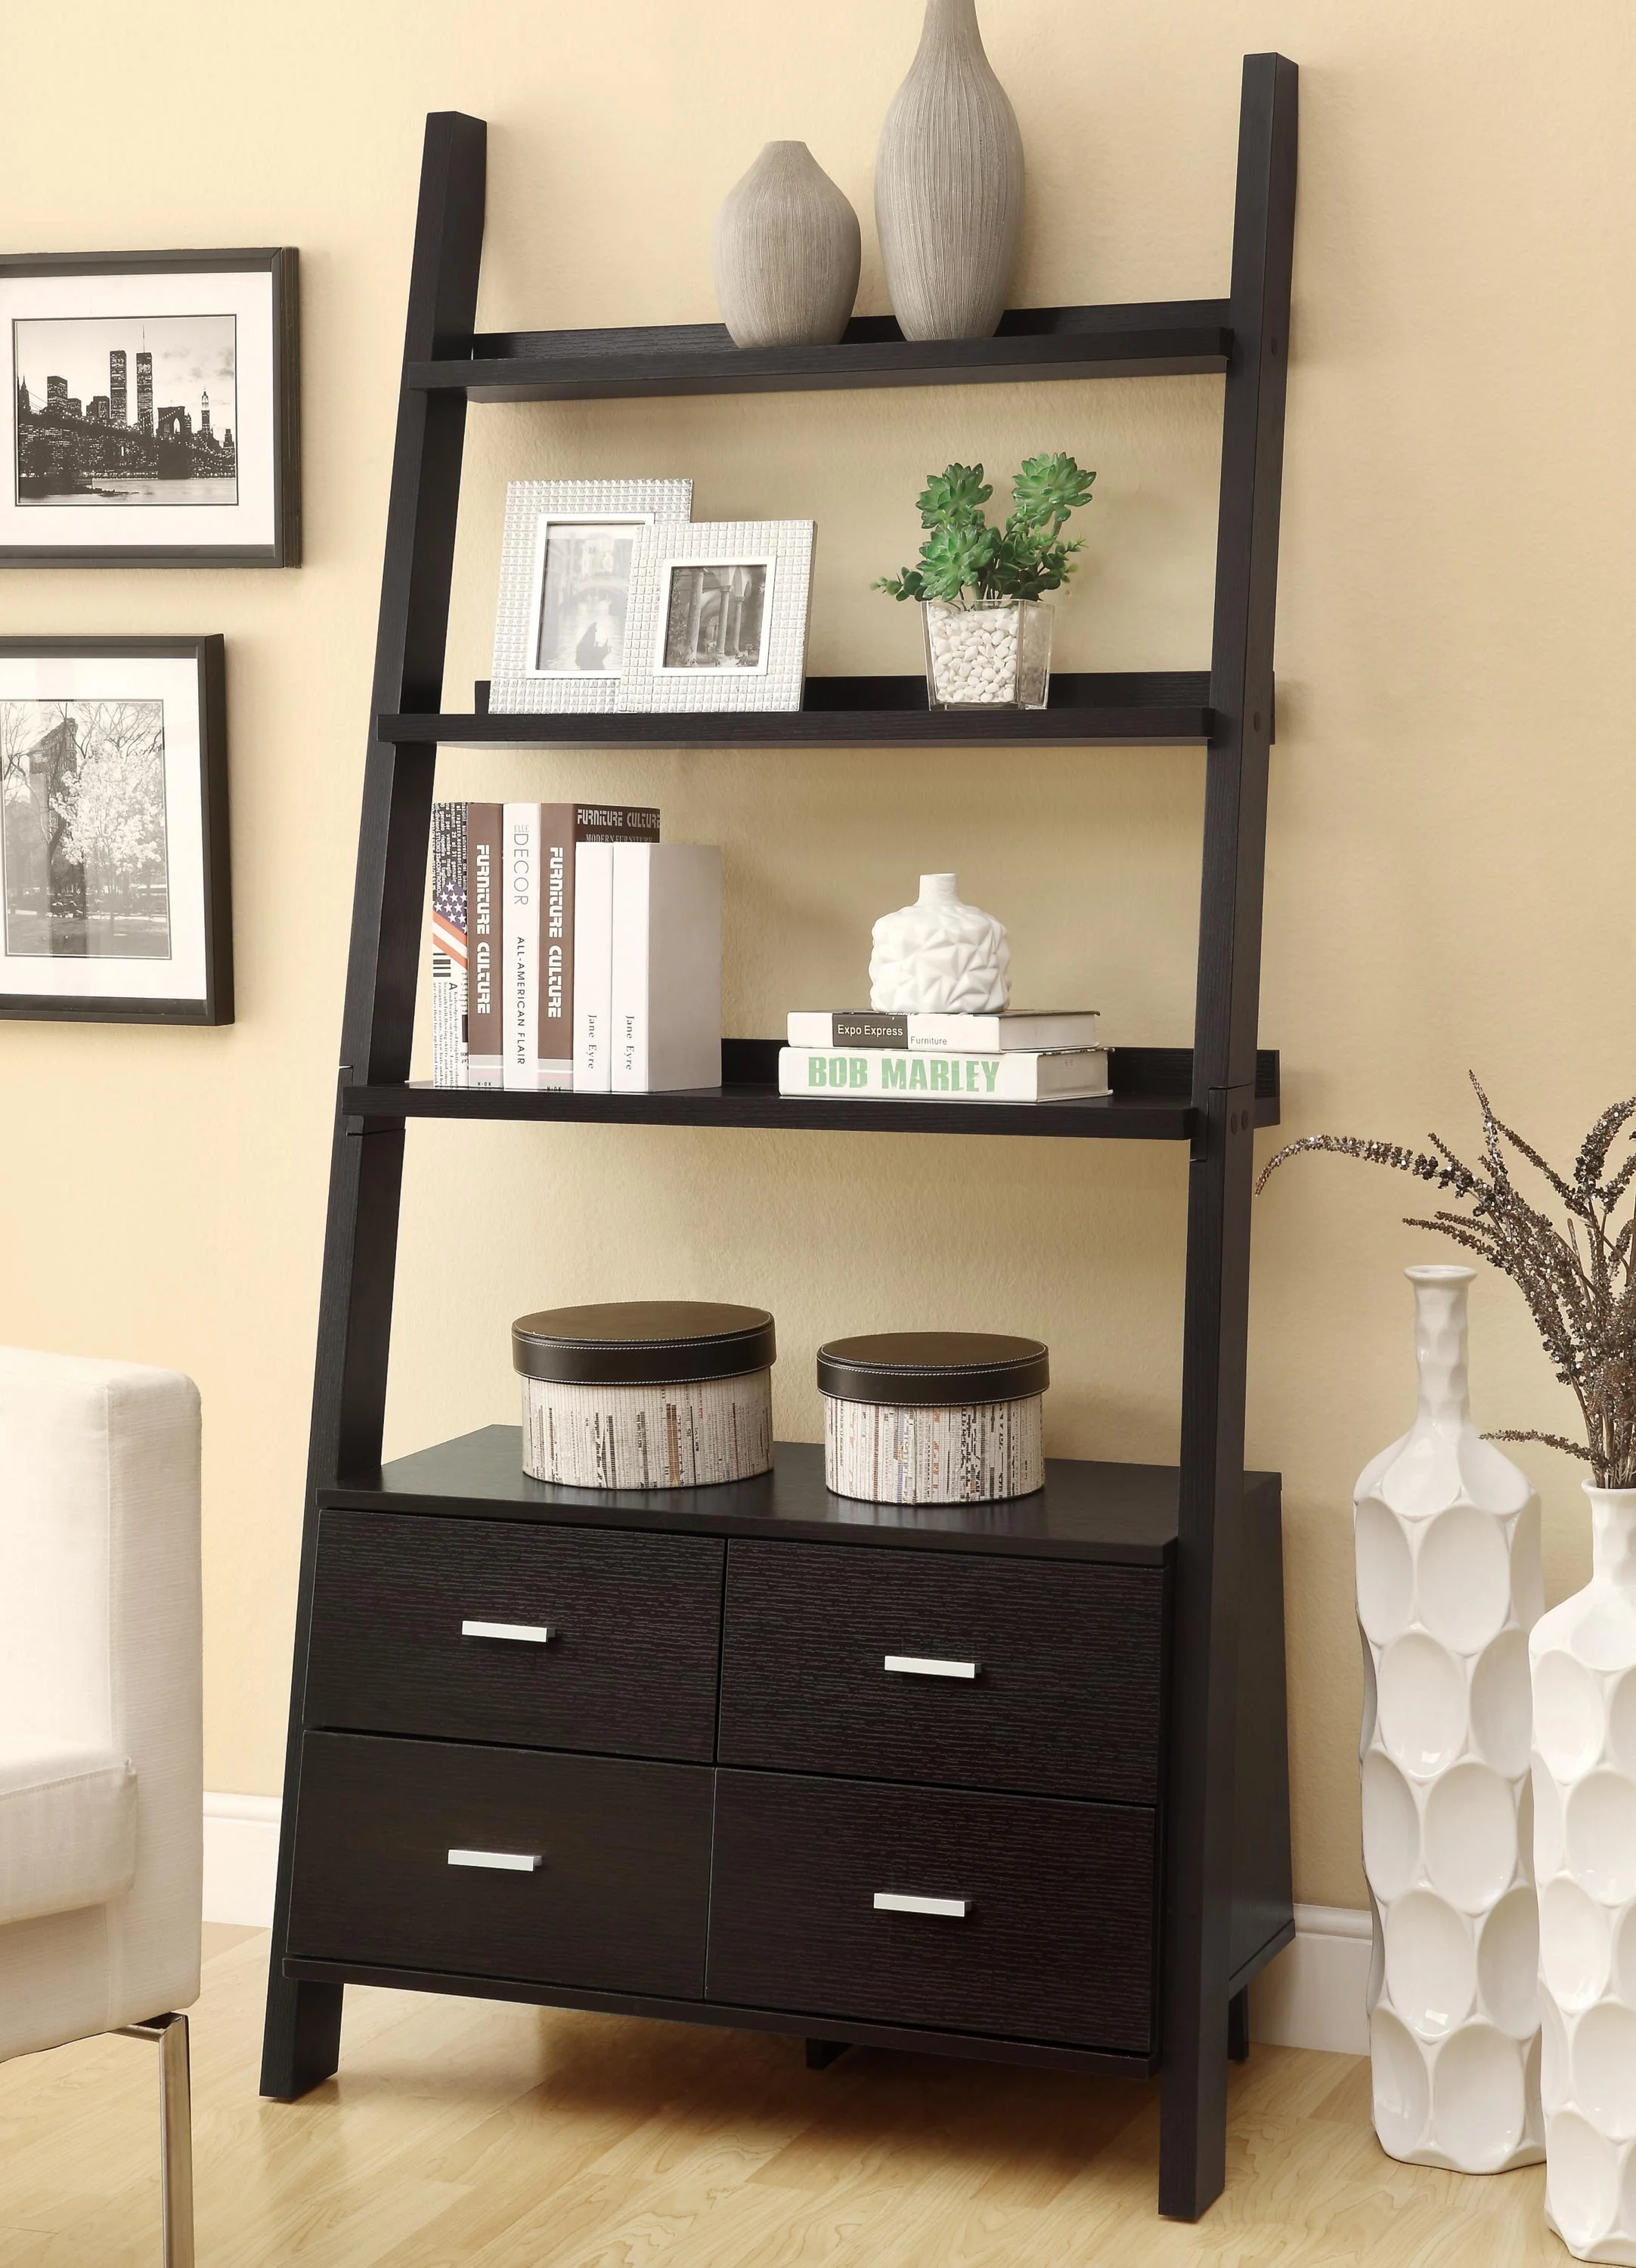 Coaster Bookcases 800319 Leaning Ladder Bookshelf With 2 Drawers